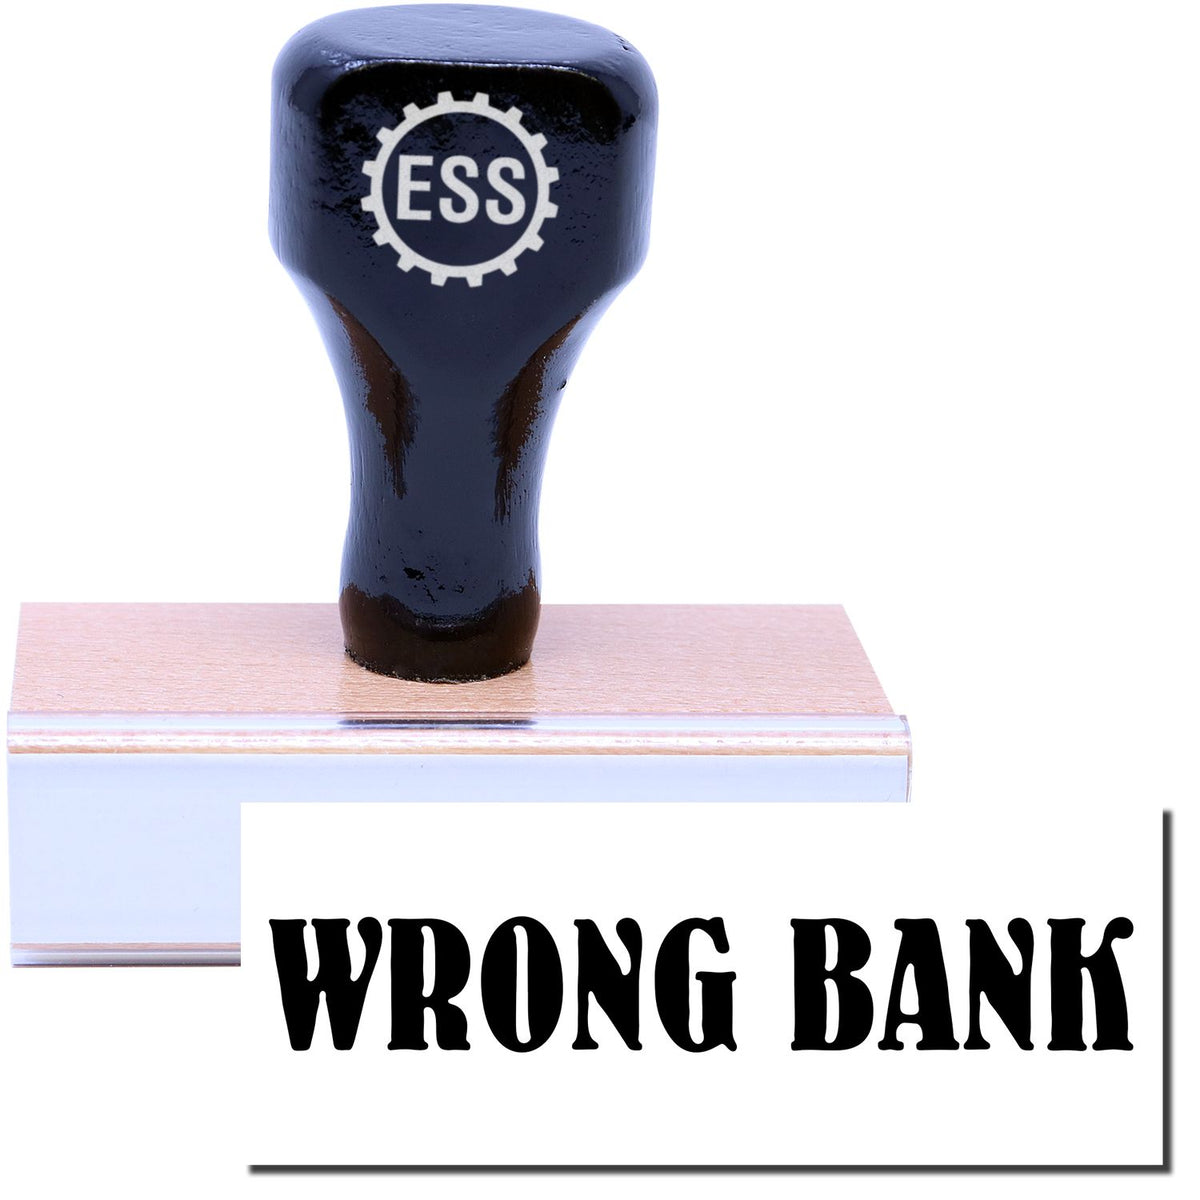 A stock office rubber stamp with a stamped image showing how the text &quot;WRONG BANK&quot; in a large font is displayed after stamping.